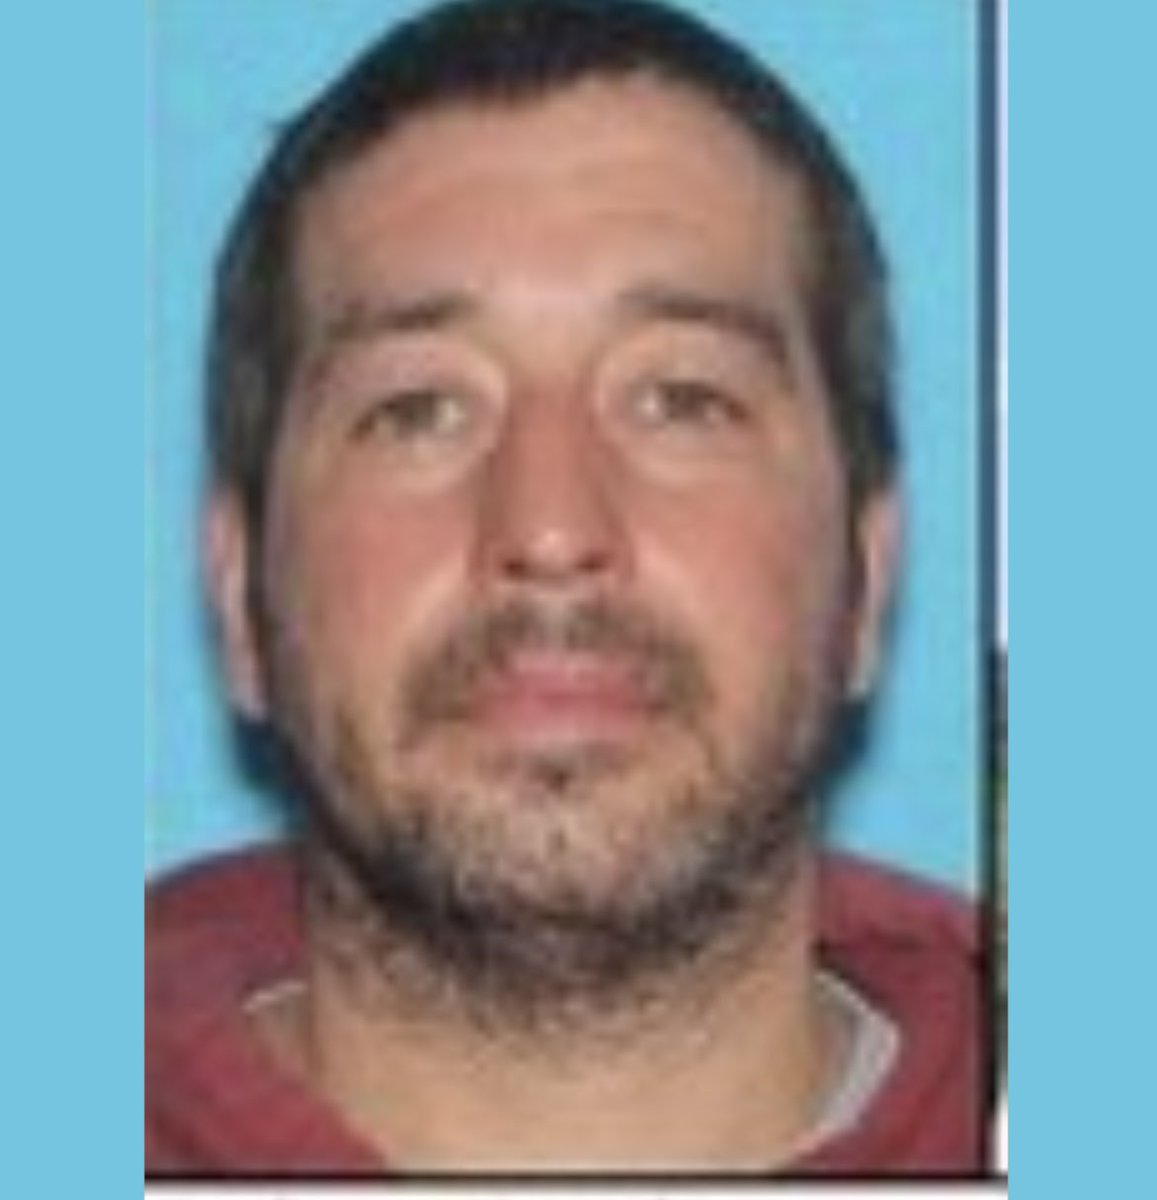 #ME state police: arrest warrant issued for Robert Card on 8 counts of murder. #WBZ #ITeam Suspect in #Lewiston shooting that left 18 dead and 13 wounded is still at large